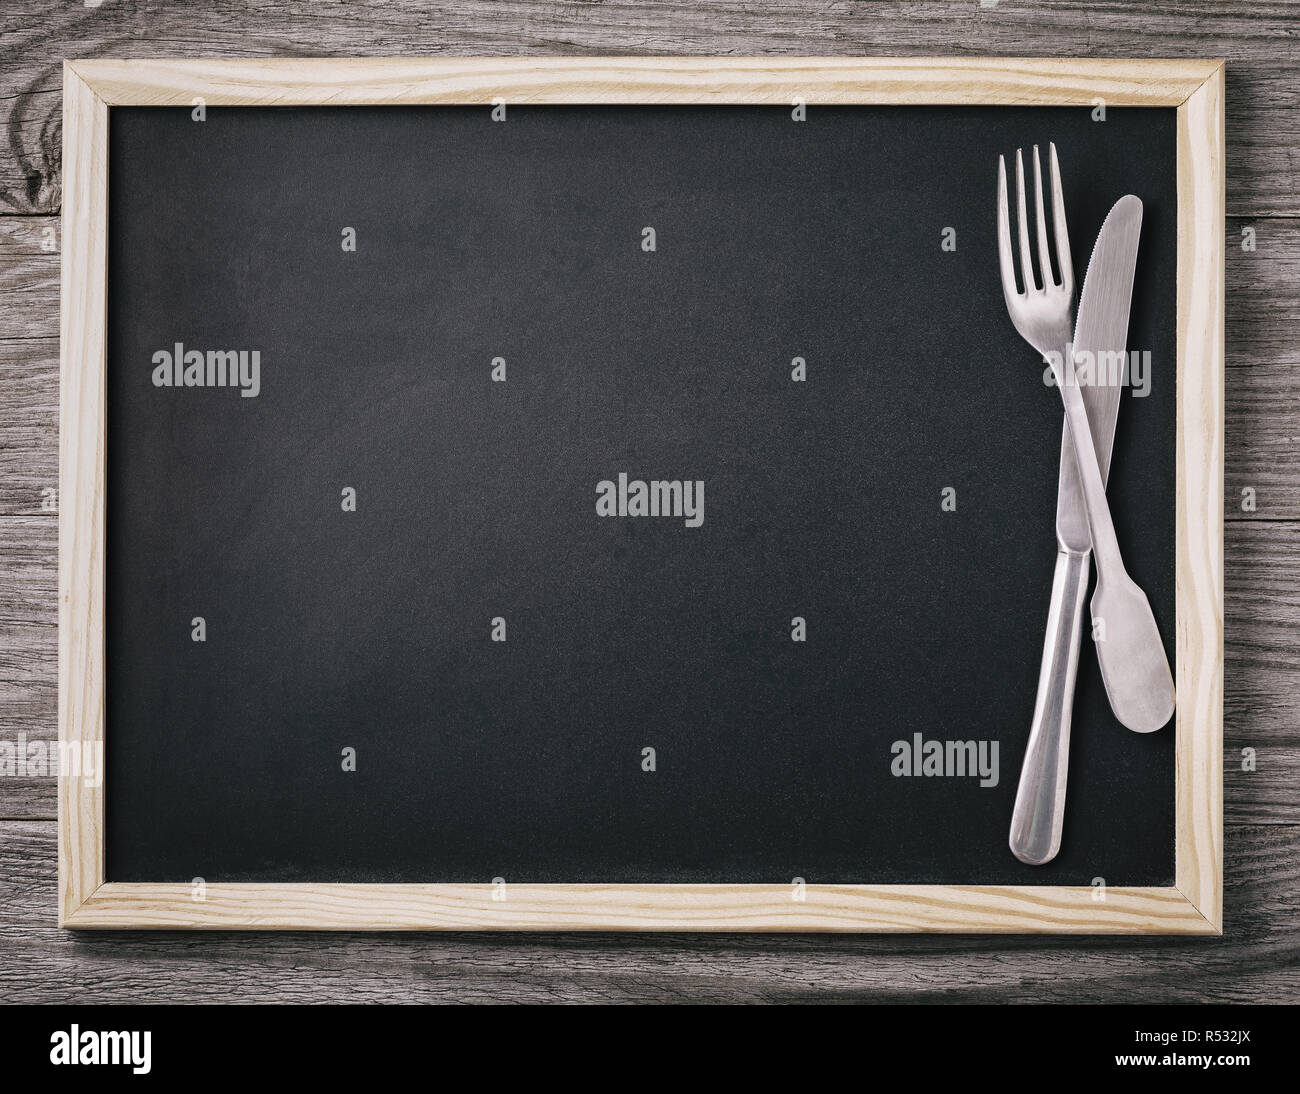 Empty menu blackboard with knife and fork on wooden background. Food background Stock Photo